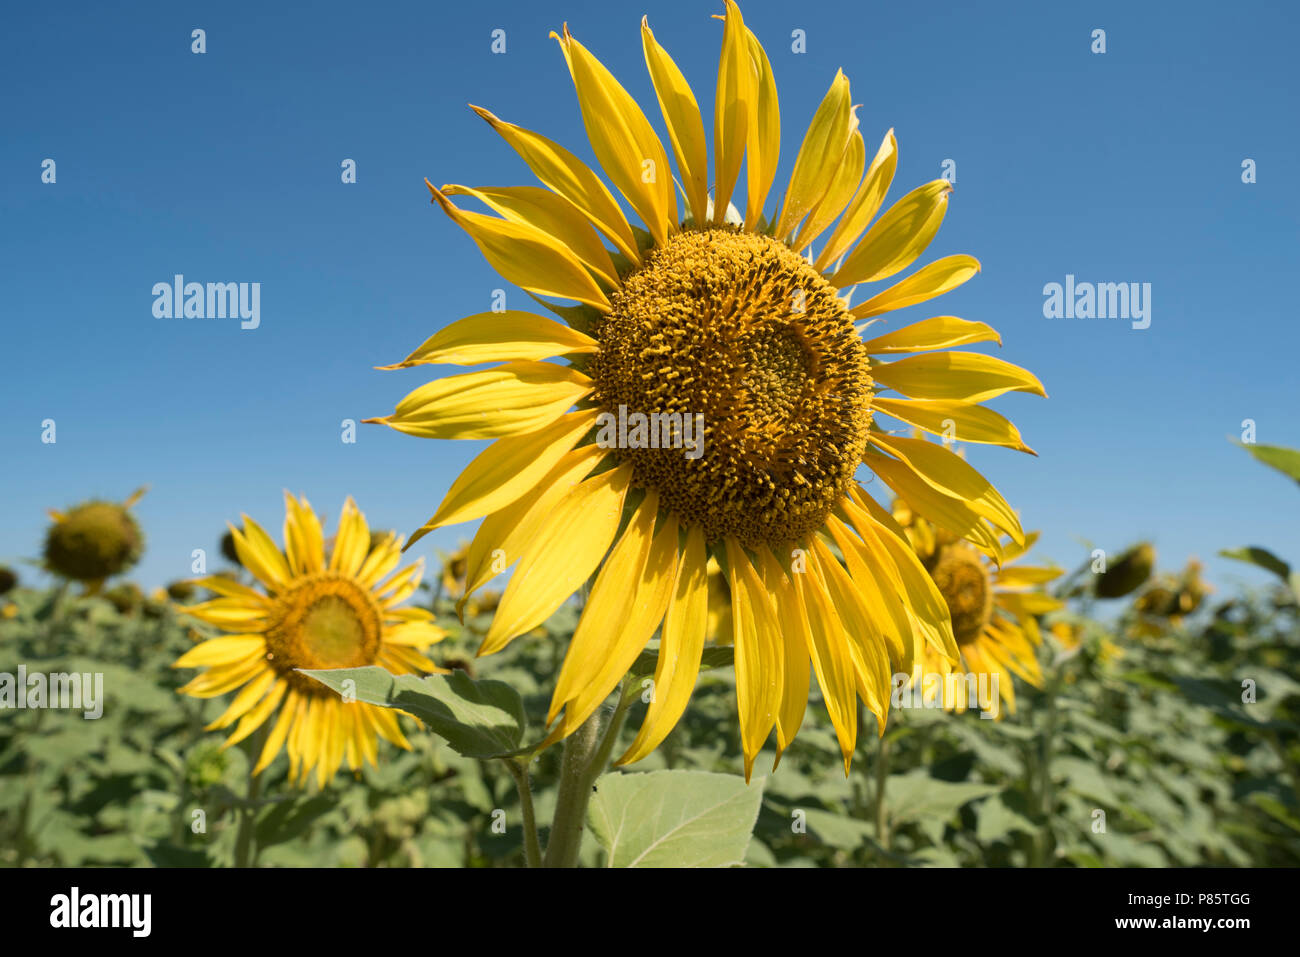 Sunflower closeup in beautiful sunny summer day. Yellow flower on green rural landscape background. Stock Photo